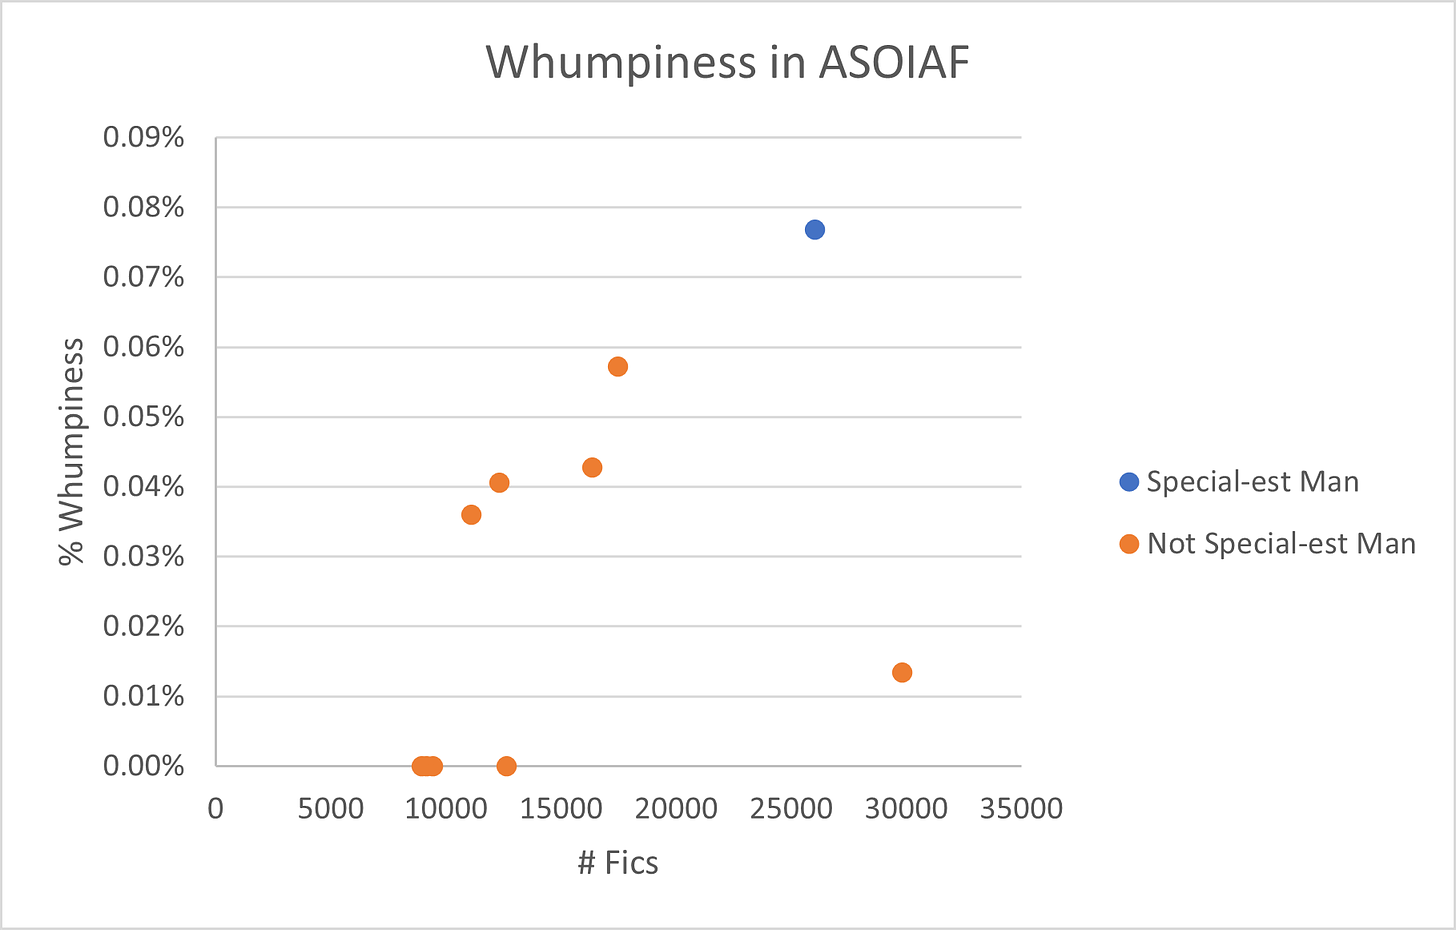 A scatterplot labeled Whumpiness in ASOIAF with # Fics on the x axis and % Whumpiness on the y axis. The graph has eight orange dots scattered around the graph, all below .06% whumpiness. The furthest-right dot on the graph is an orange dot at around .015% whumpiness. The second rightmost dot is a blue dot that is at .07% whumpiness—the hightest dot on the graph.